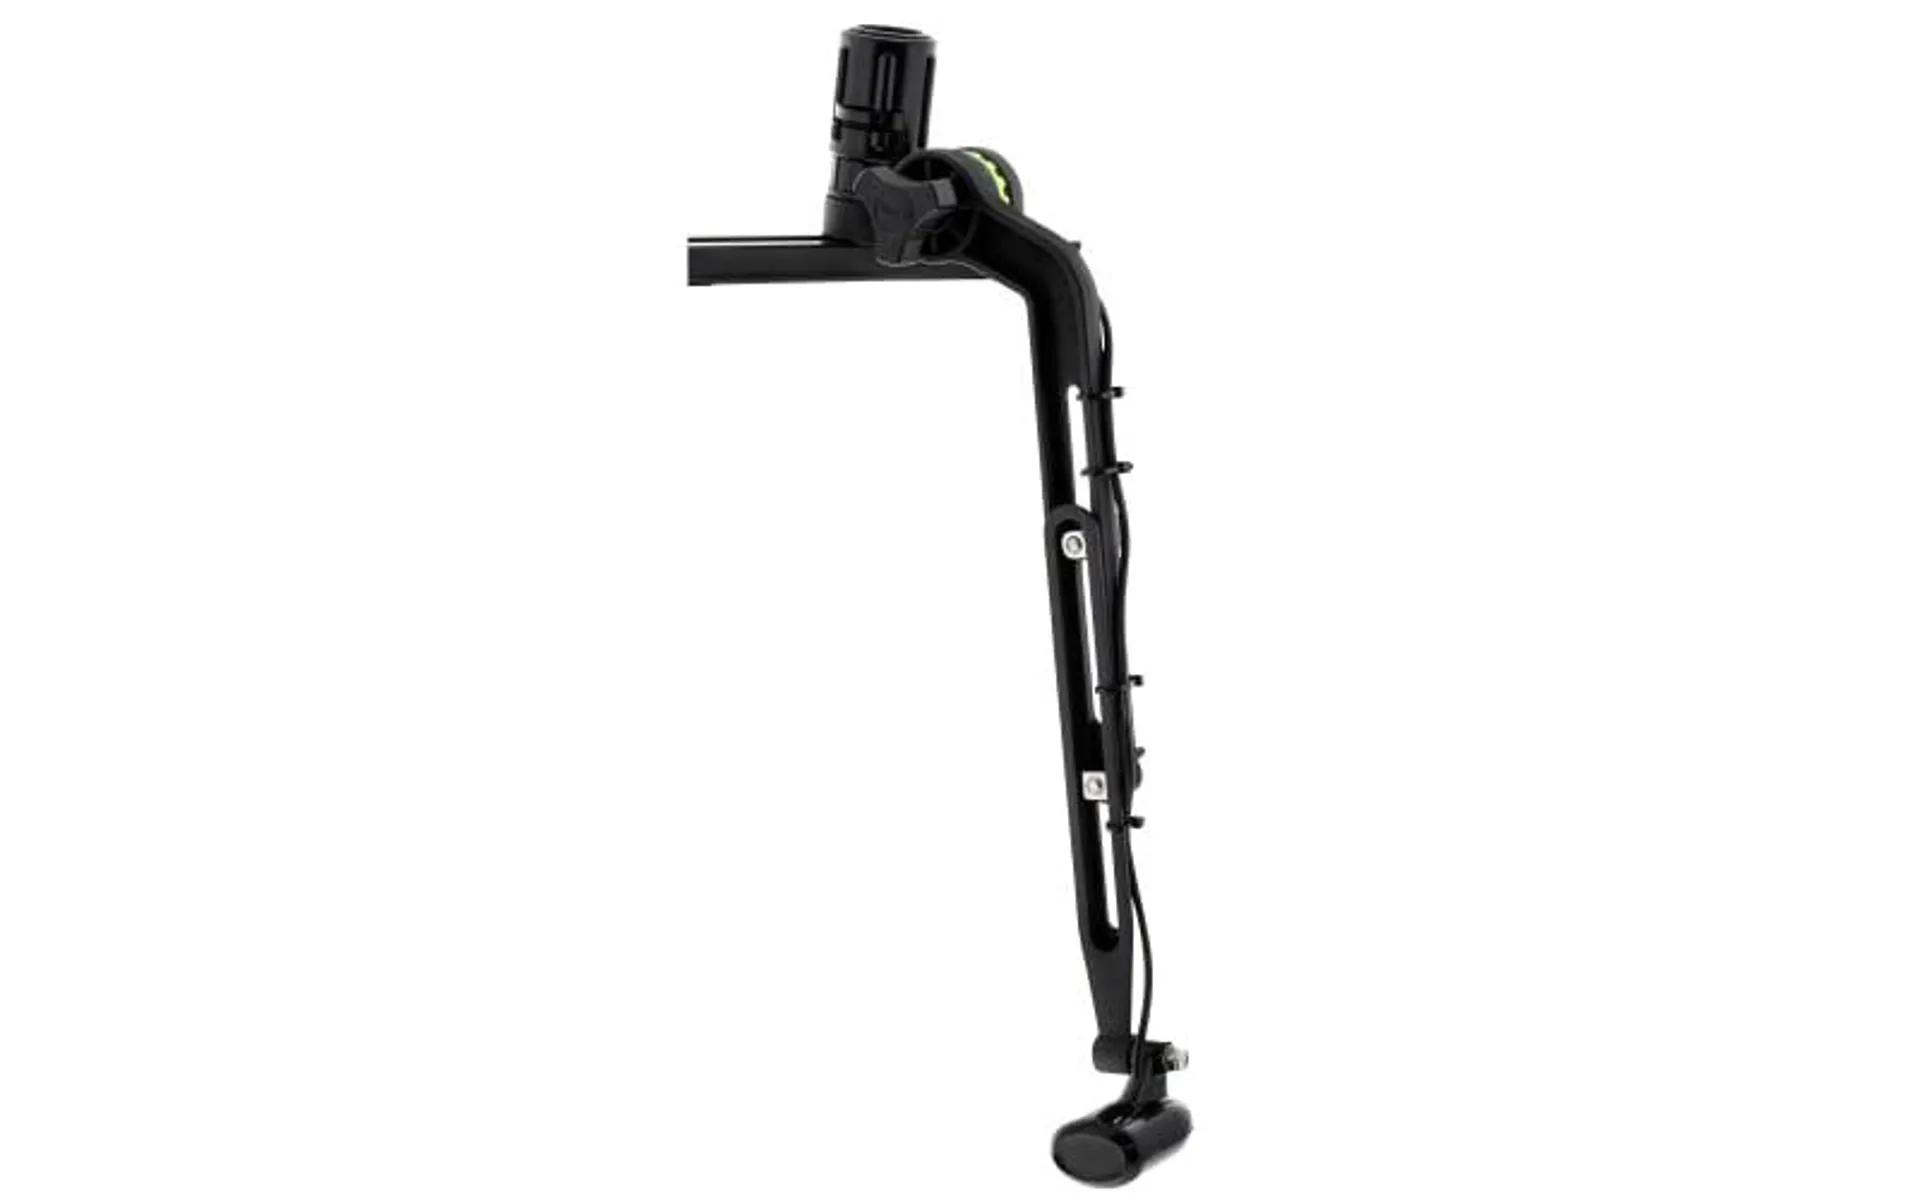 Scotty Kayak/SUP Transducer Arm Mount for Post Mount with Gear-Head Adapter